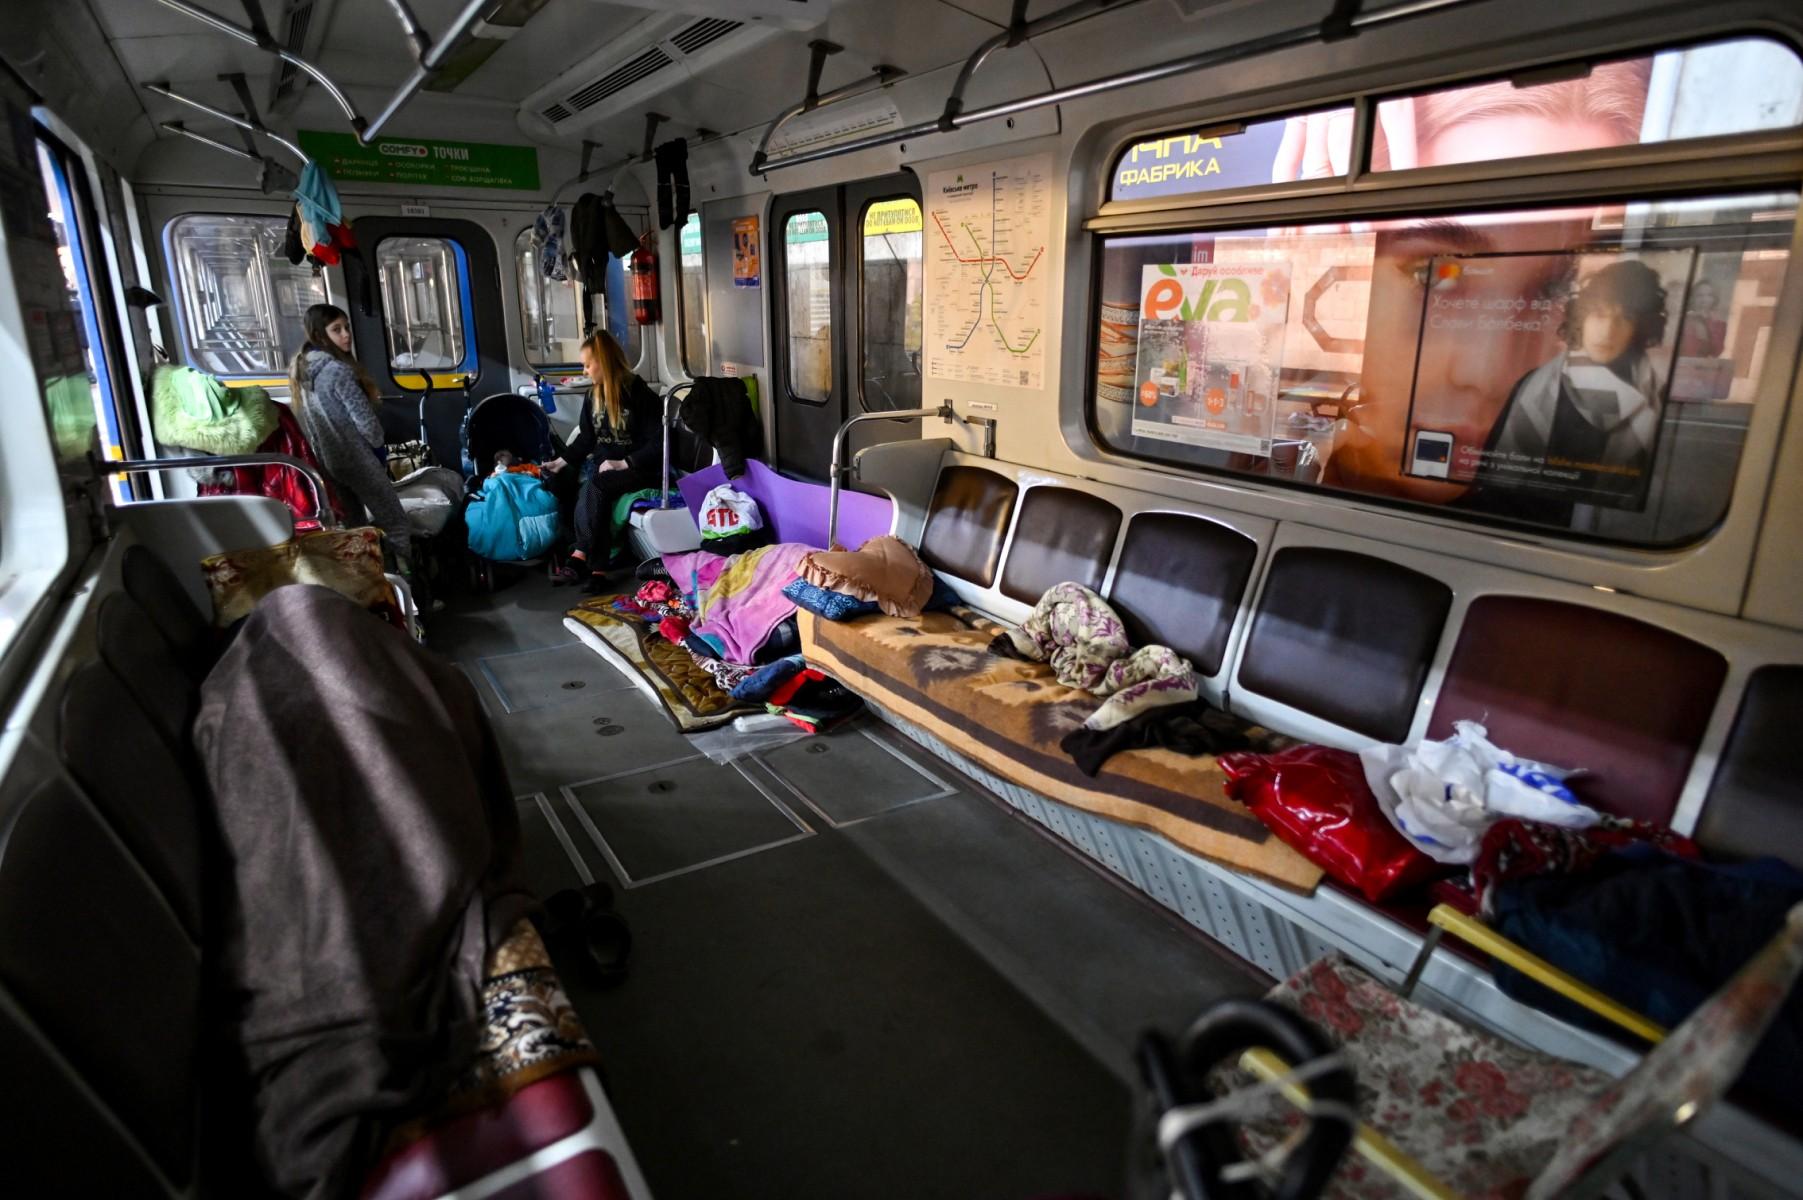 A family takes shelter in a metro car in Kyiv on March 2. On the seventh day of fighting in Ukraine Russia claims control on March 2 of the southern port city of Kherson, street battles rage in Ukraine's second-biggest city Kharkiv, and Kyiv braces for a feared Russian assault. Photo: AFP